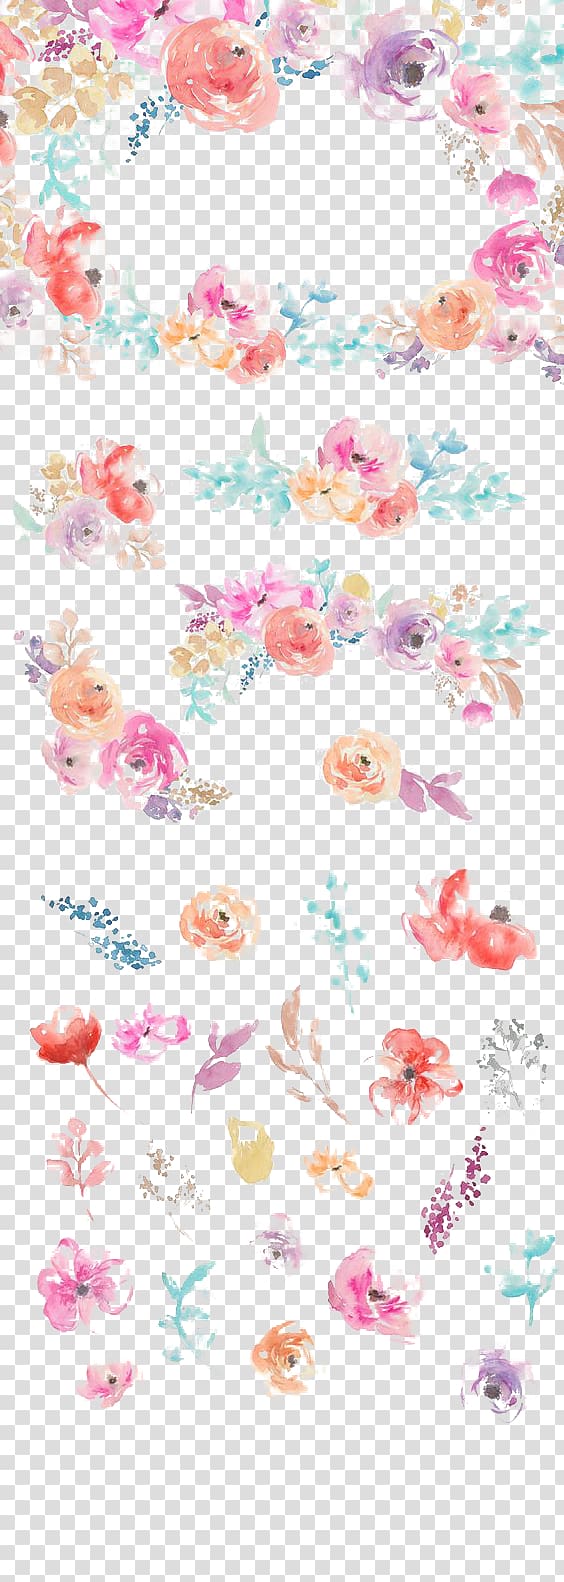 blue, yellow, orange, purple floral background, Hand-painted flowers transparent background PNG clipart